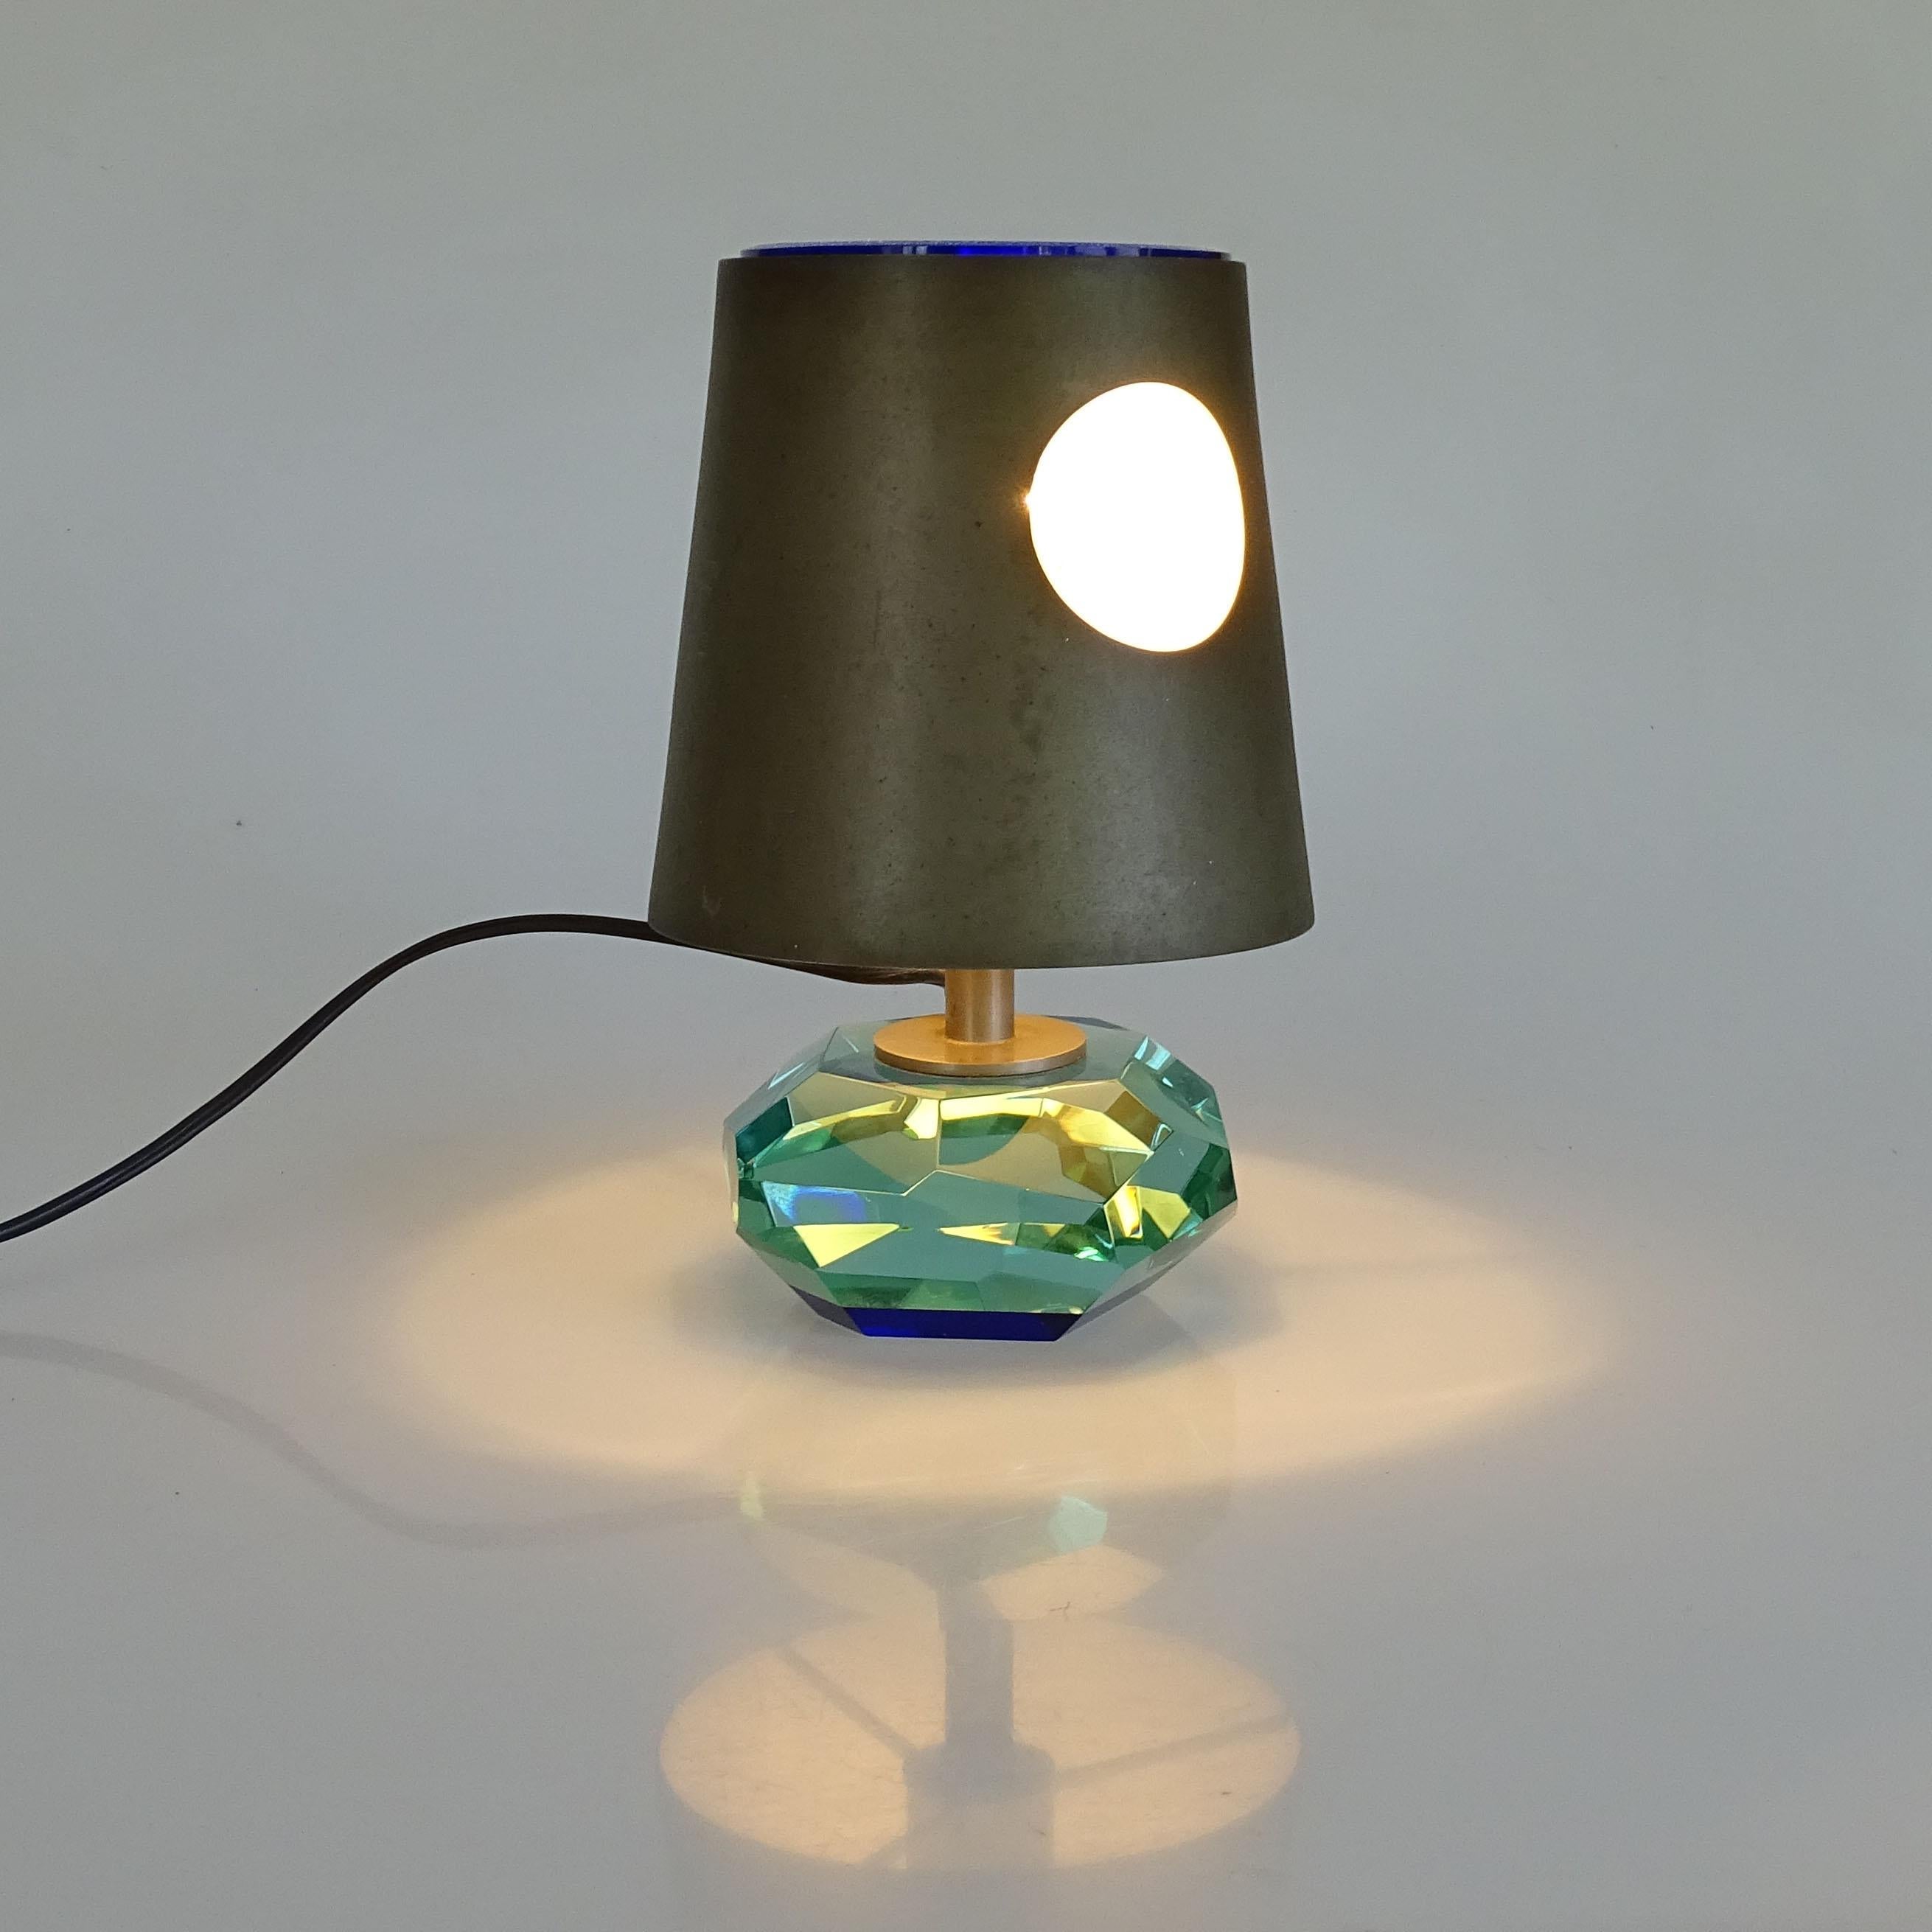 Iconic Max Ingrand pair of table lamps model. 2228 for Fontana Arte, Italy 1960s
All original.